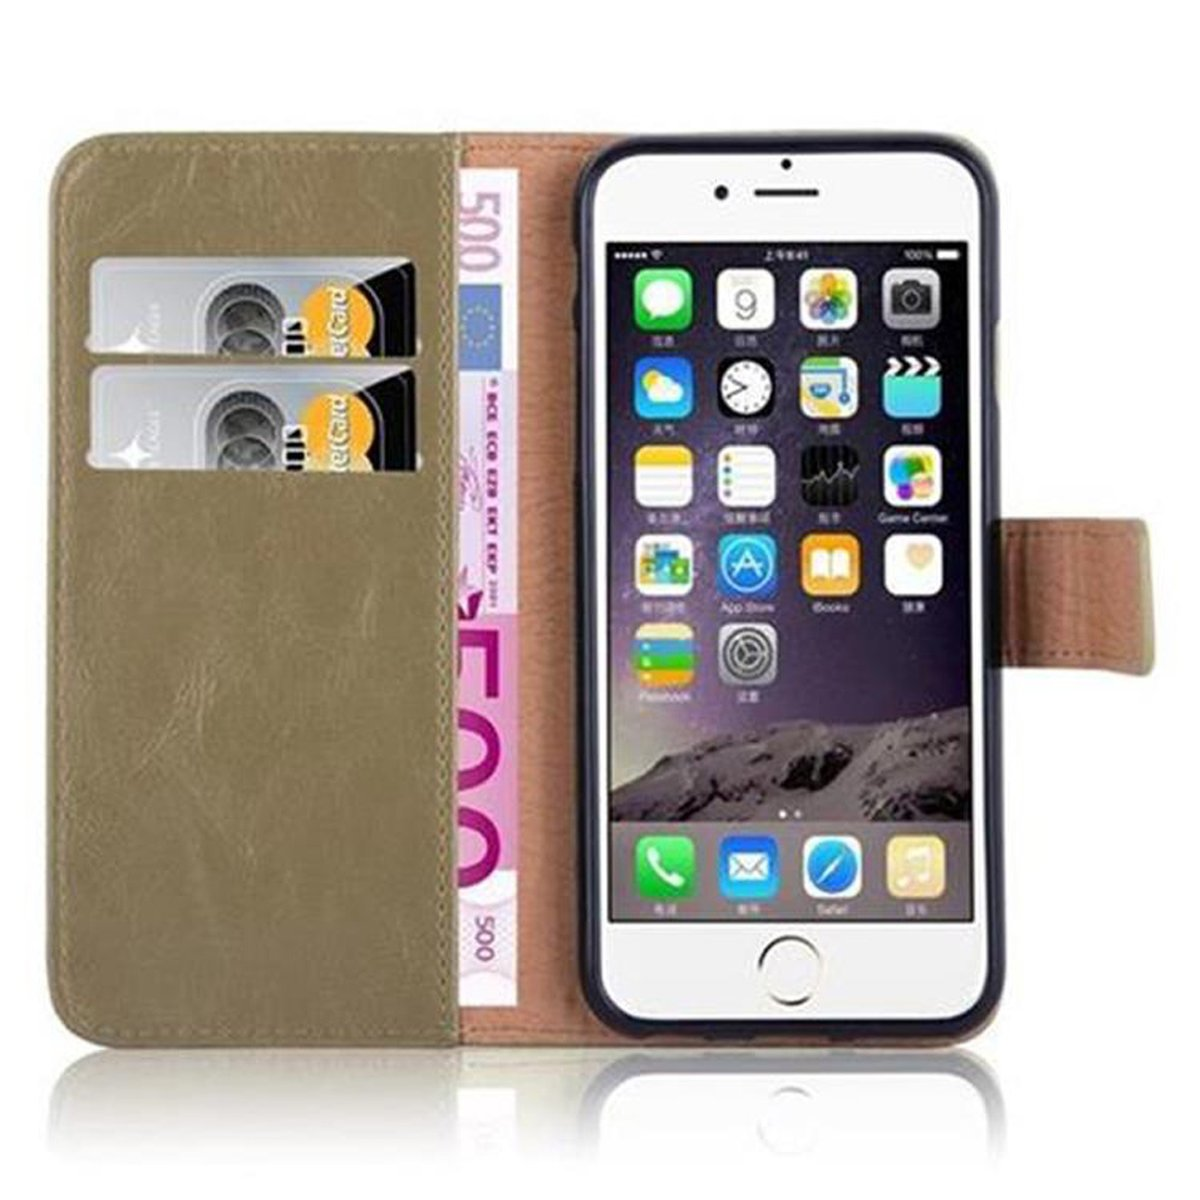 / Luxury Apple, Bookcover, Hülle BRAUN CADORABO 6S, CAPPUCCINO Style, Book 6 iPhone